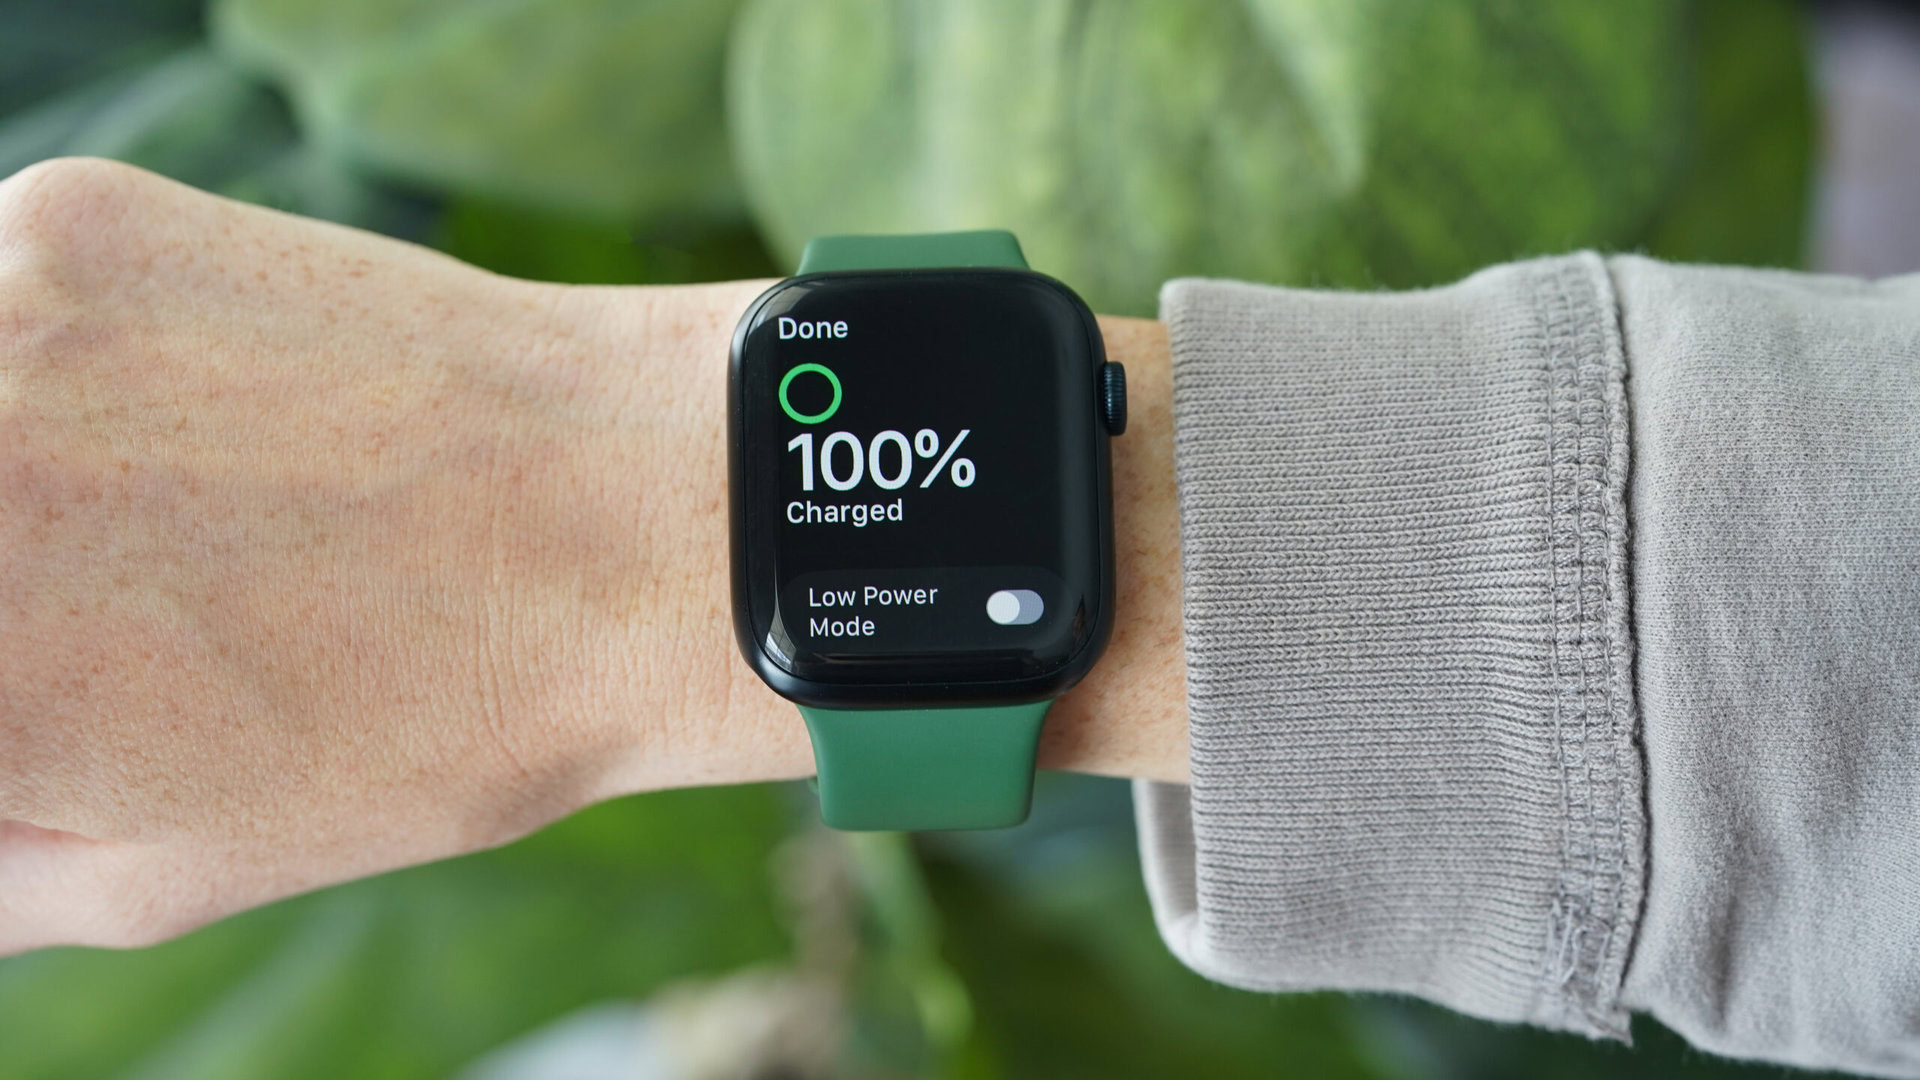 Want to Switch From Fitbit to Apple Watch? Here's My Experience